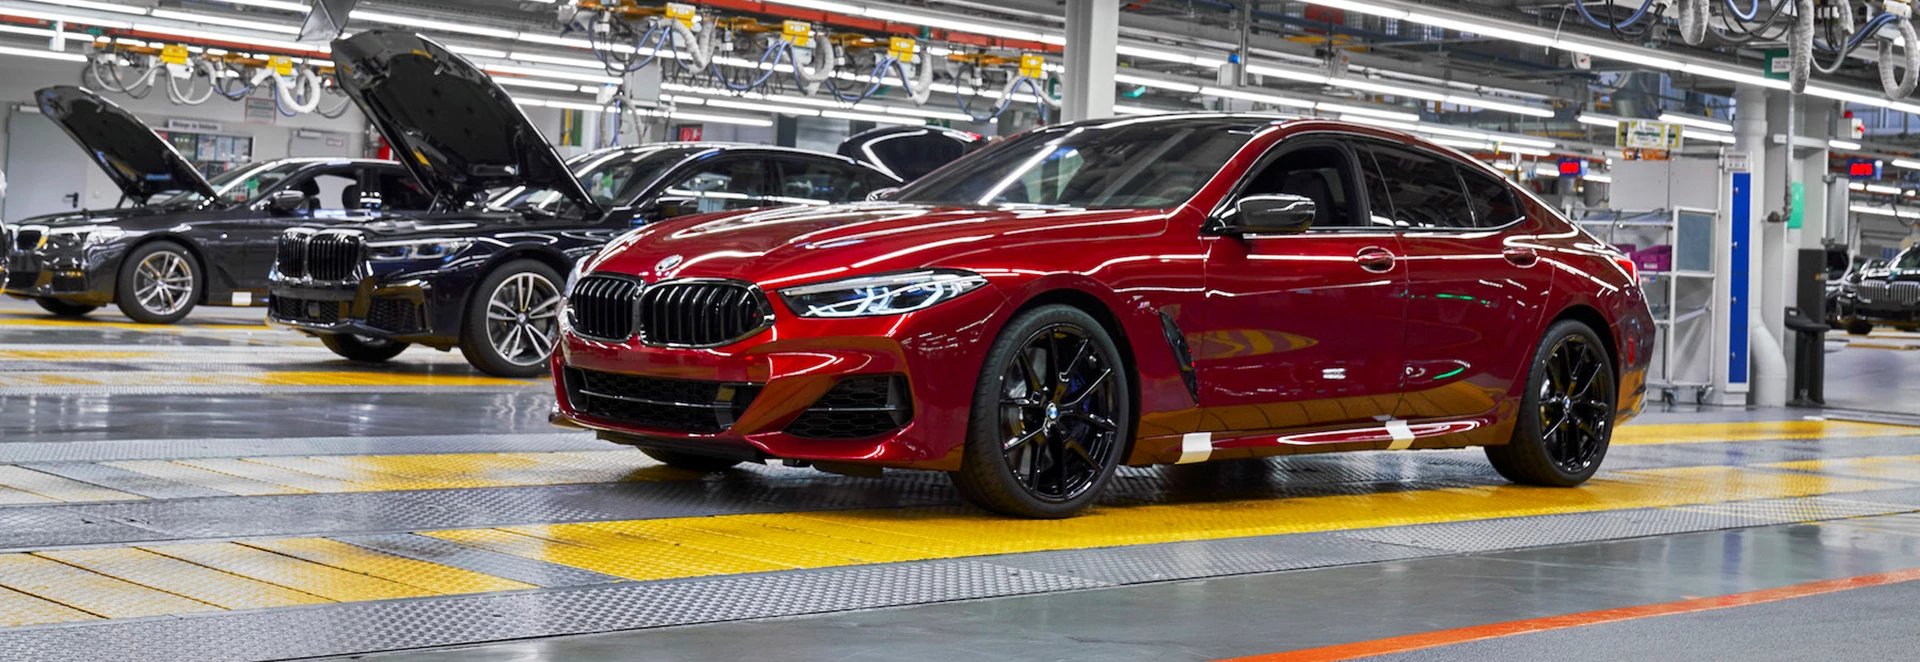 First new BMW 8 Series models enter production